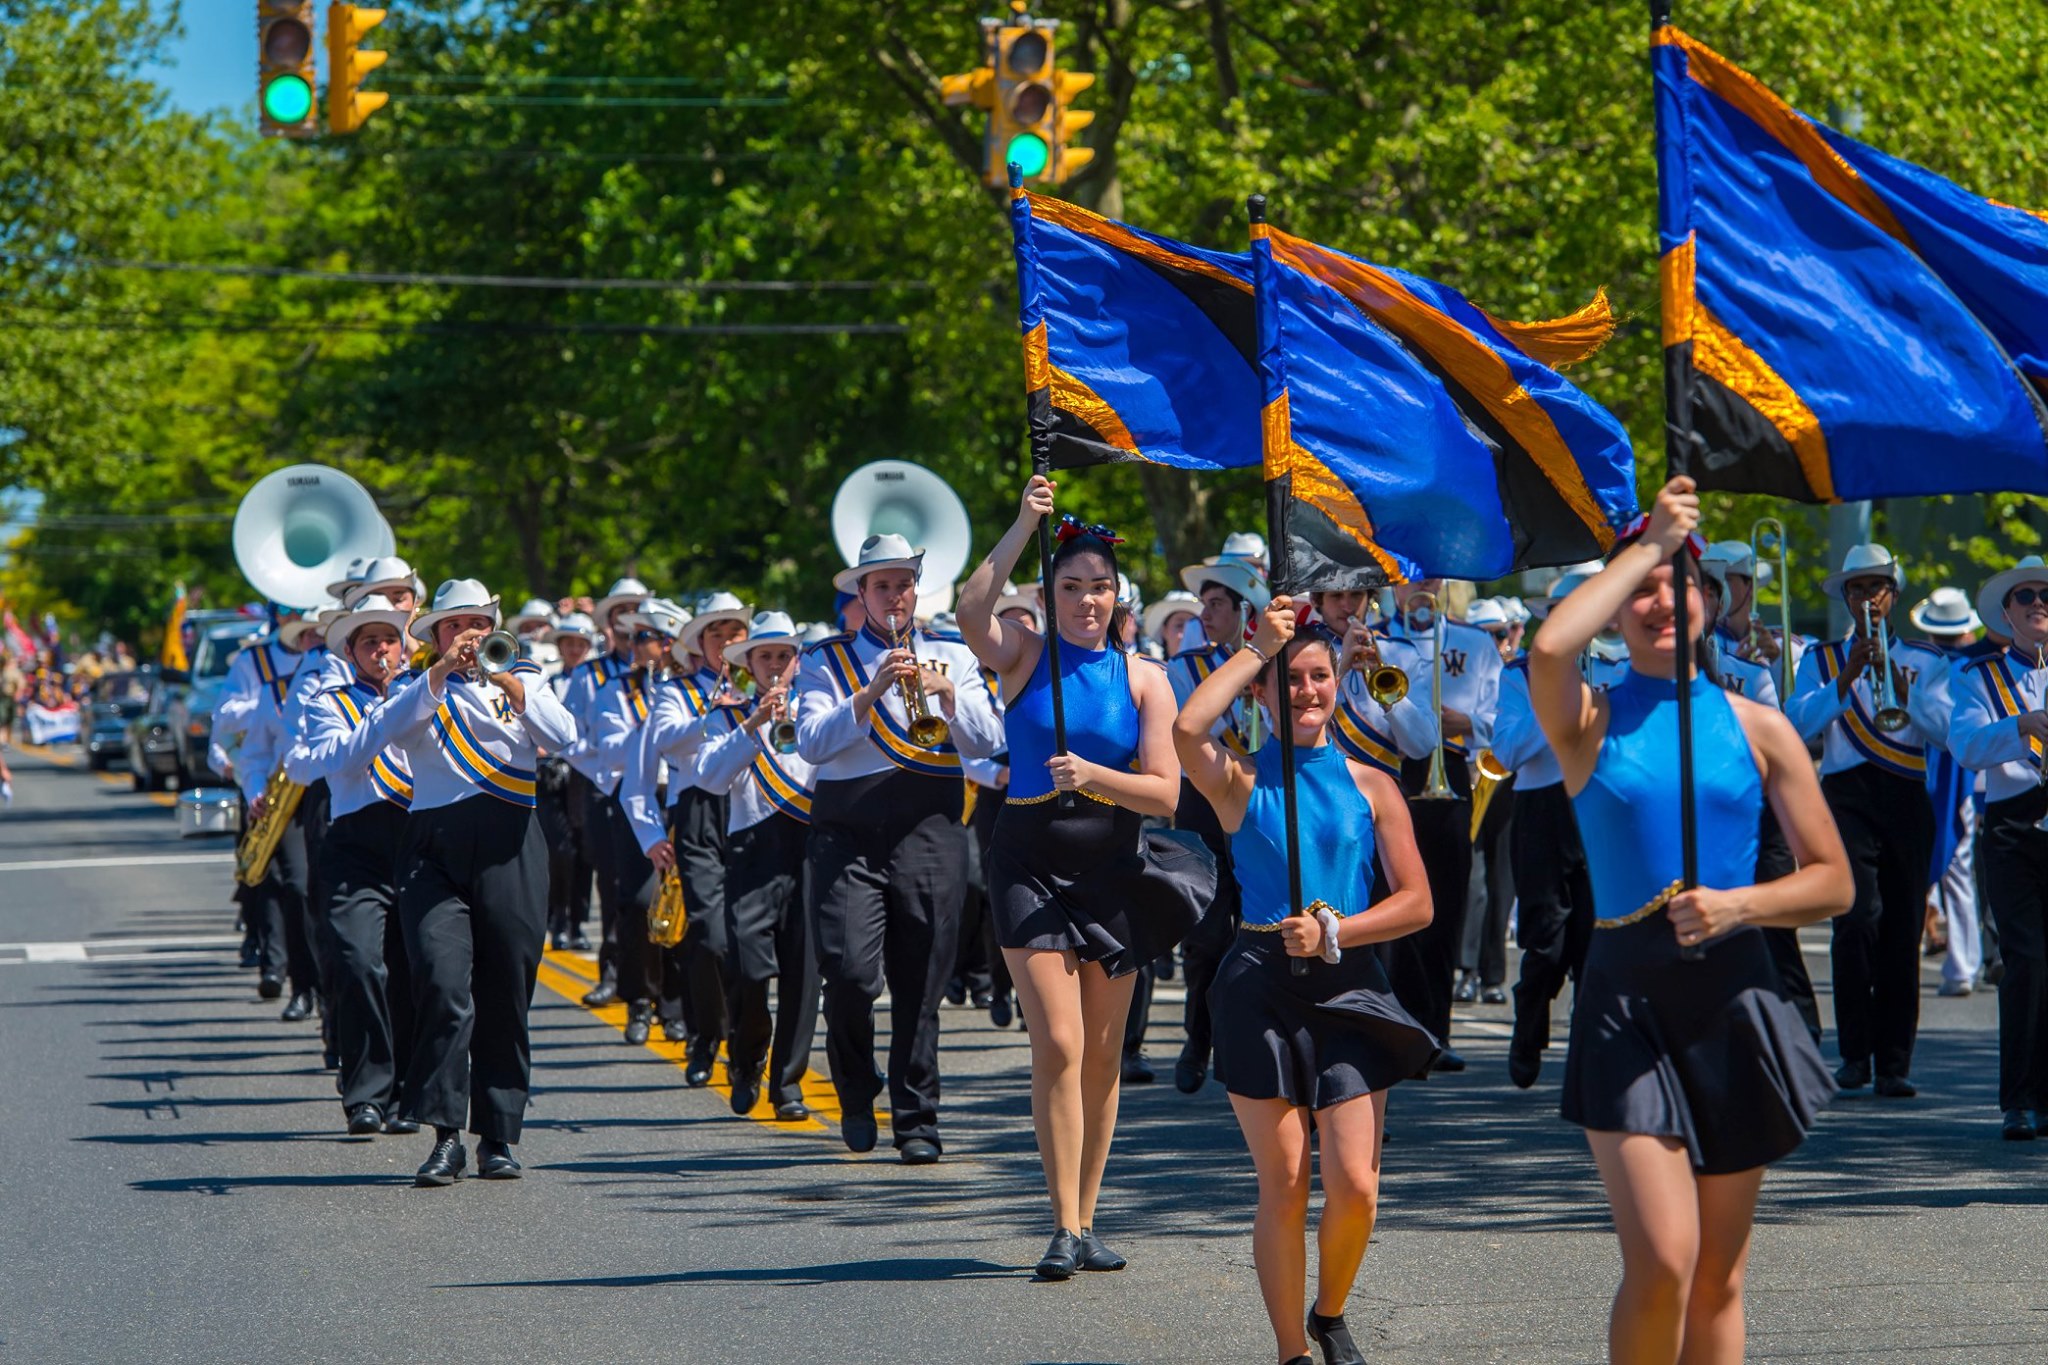 West Islip High School band marches in the parade